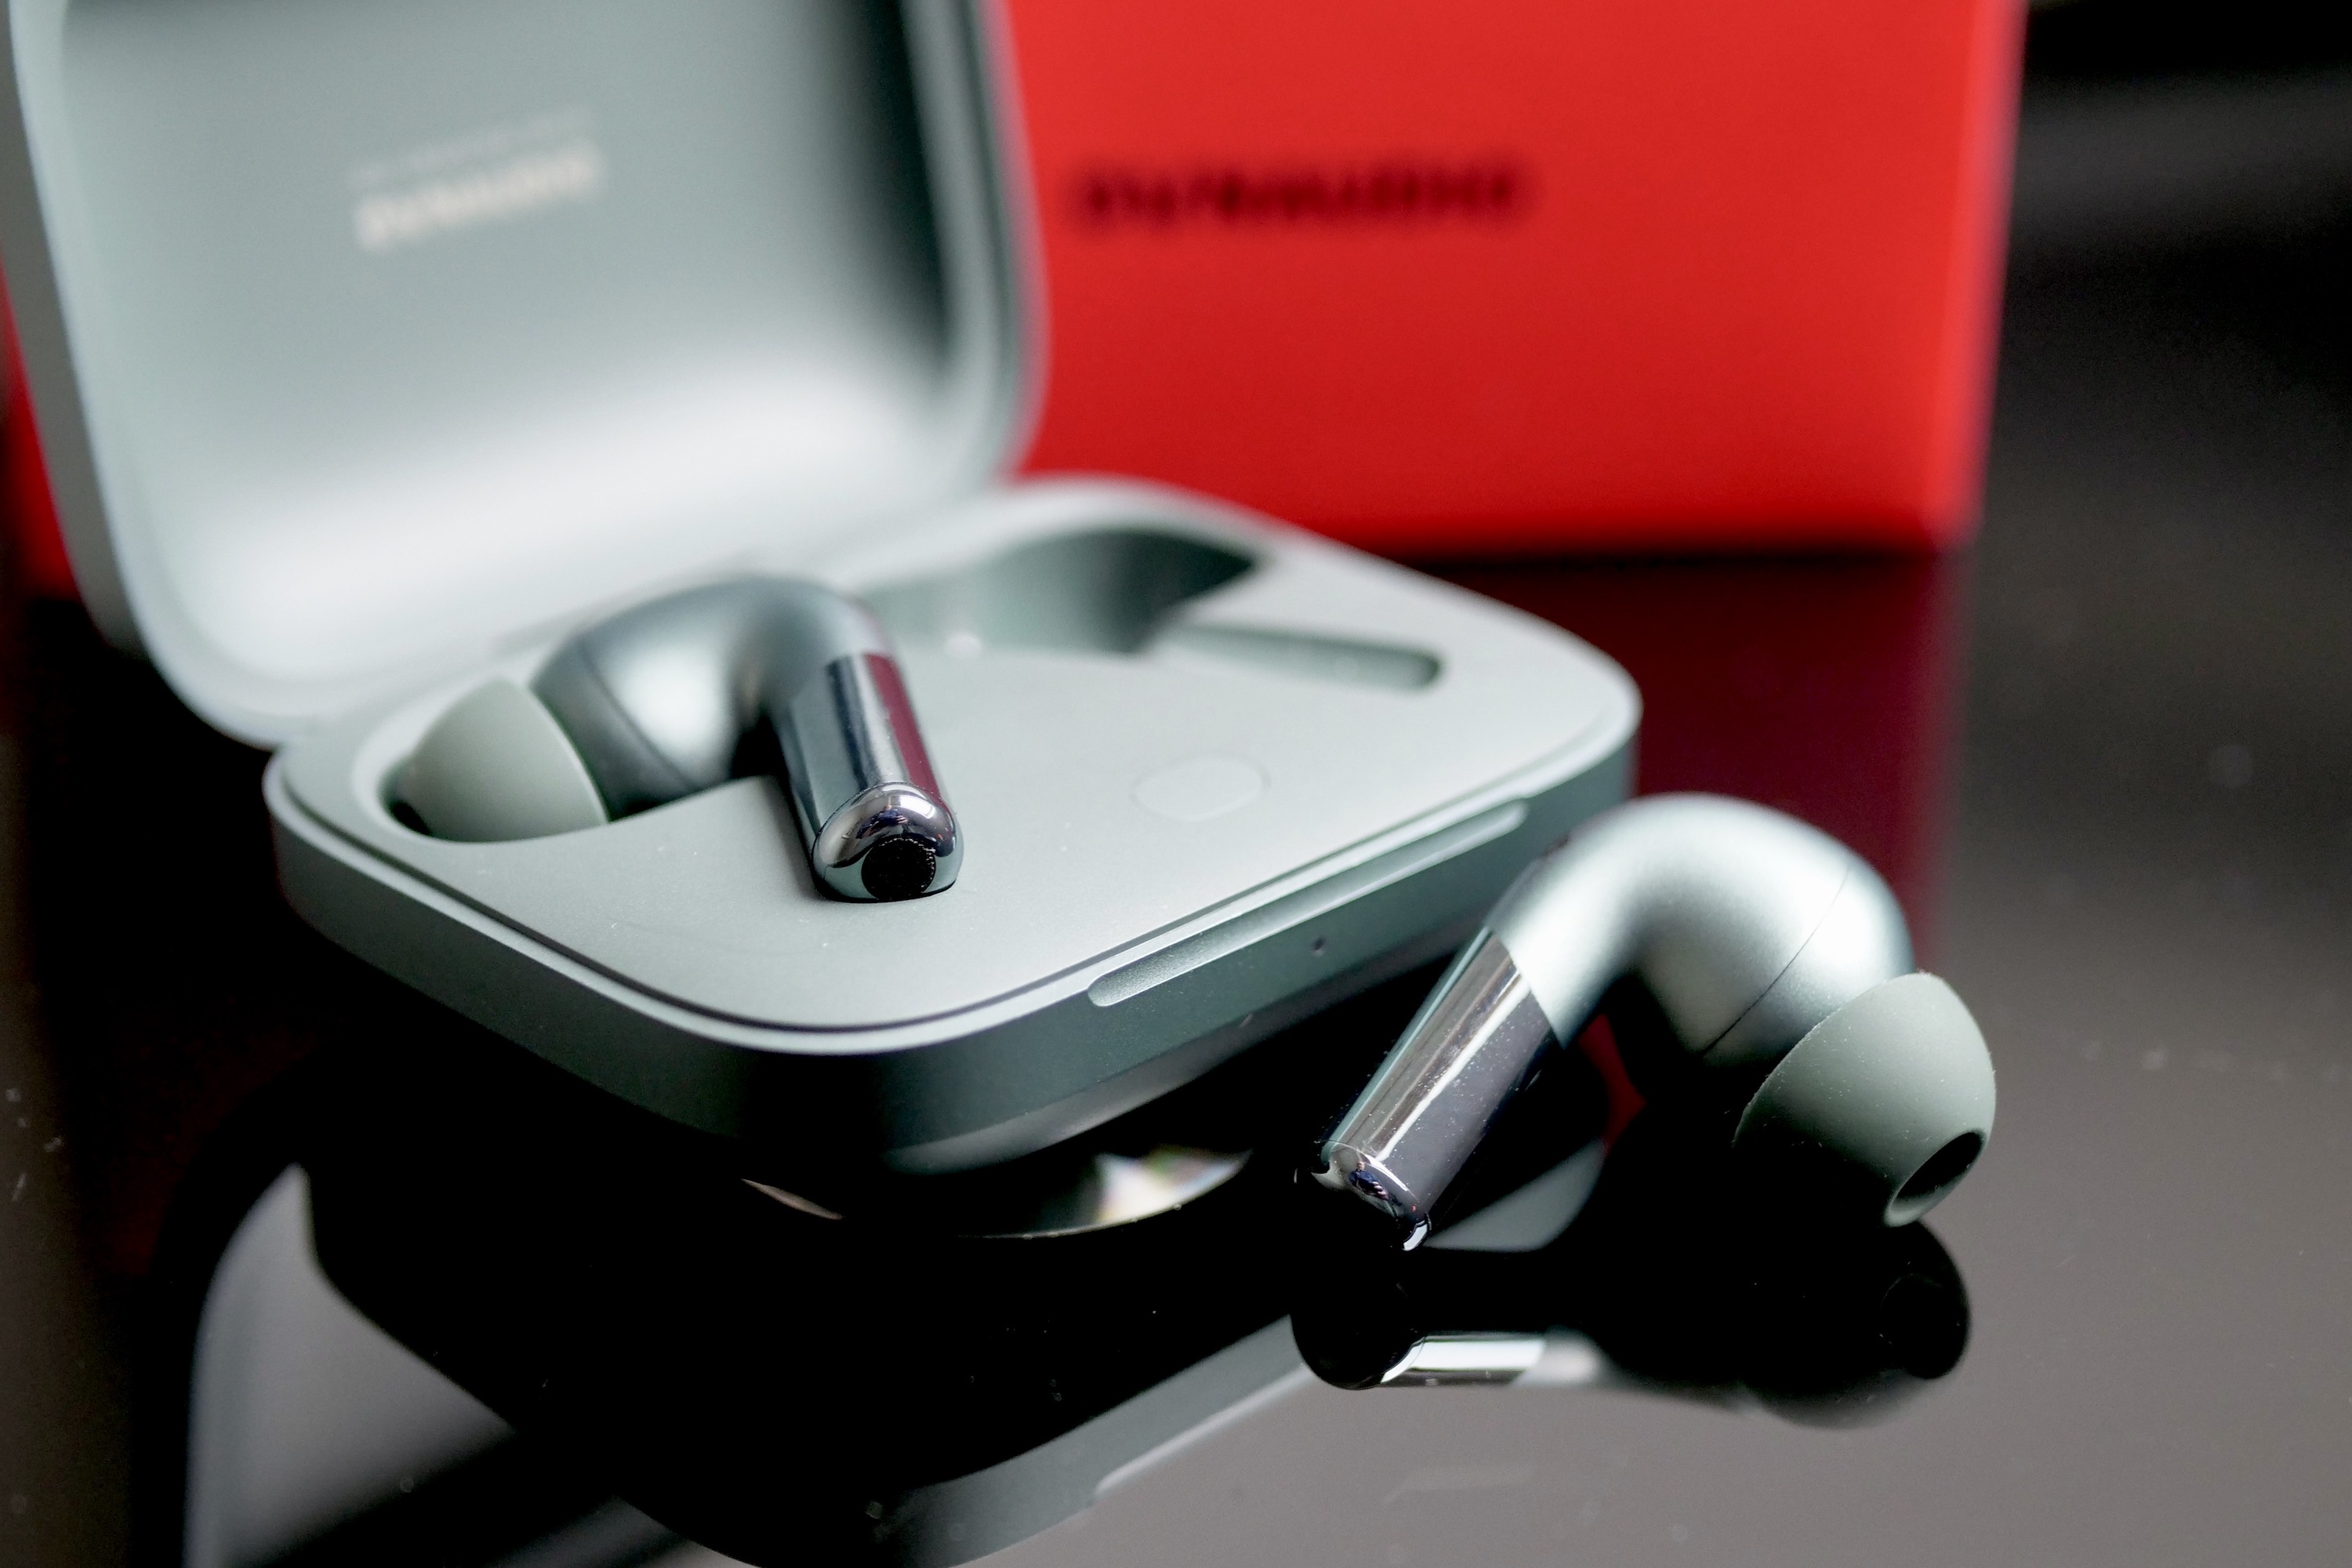 OnePlus Buds Pro 2 earbud next to its open case.